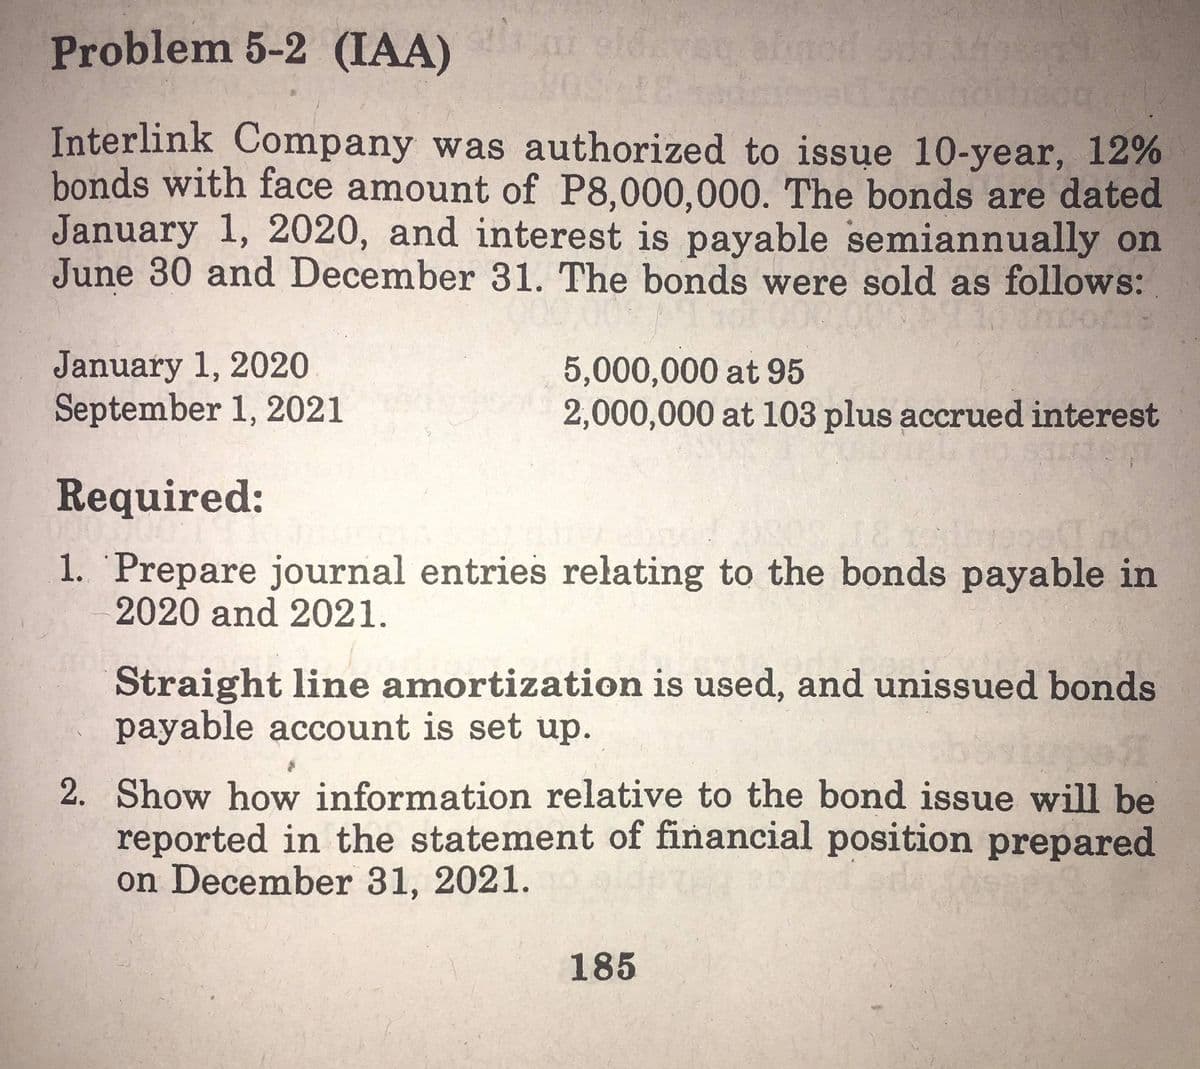 Problem 5-2 (IAA) i eldvec emod
Interlink Company was authorized to issue 10-year, 12%
bonds with face amount of P8,000,000. The bonds are dated
January 1, 2020, and interest is payable semiannually on
June 30 and December 31. The bonds were sold as follows:
January 1, 2020
September 1, 2021
5,000,000 at 95
2,000,000 at 103 plus accrued interest
Required:
1. Prepare journal entries relating to the bonds payable in
2020 and 2021.
Straight line amortization is used, and unissued bonds
payable account is set up.
2. Show how information relative to the bond issue will be
reported in the statement of financial position prepared
on December 31, 2021.
185
